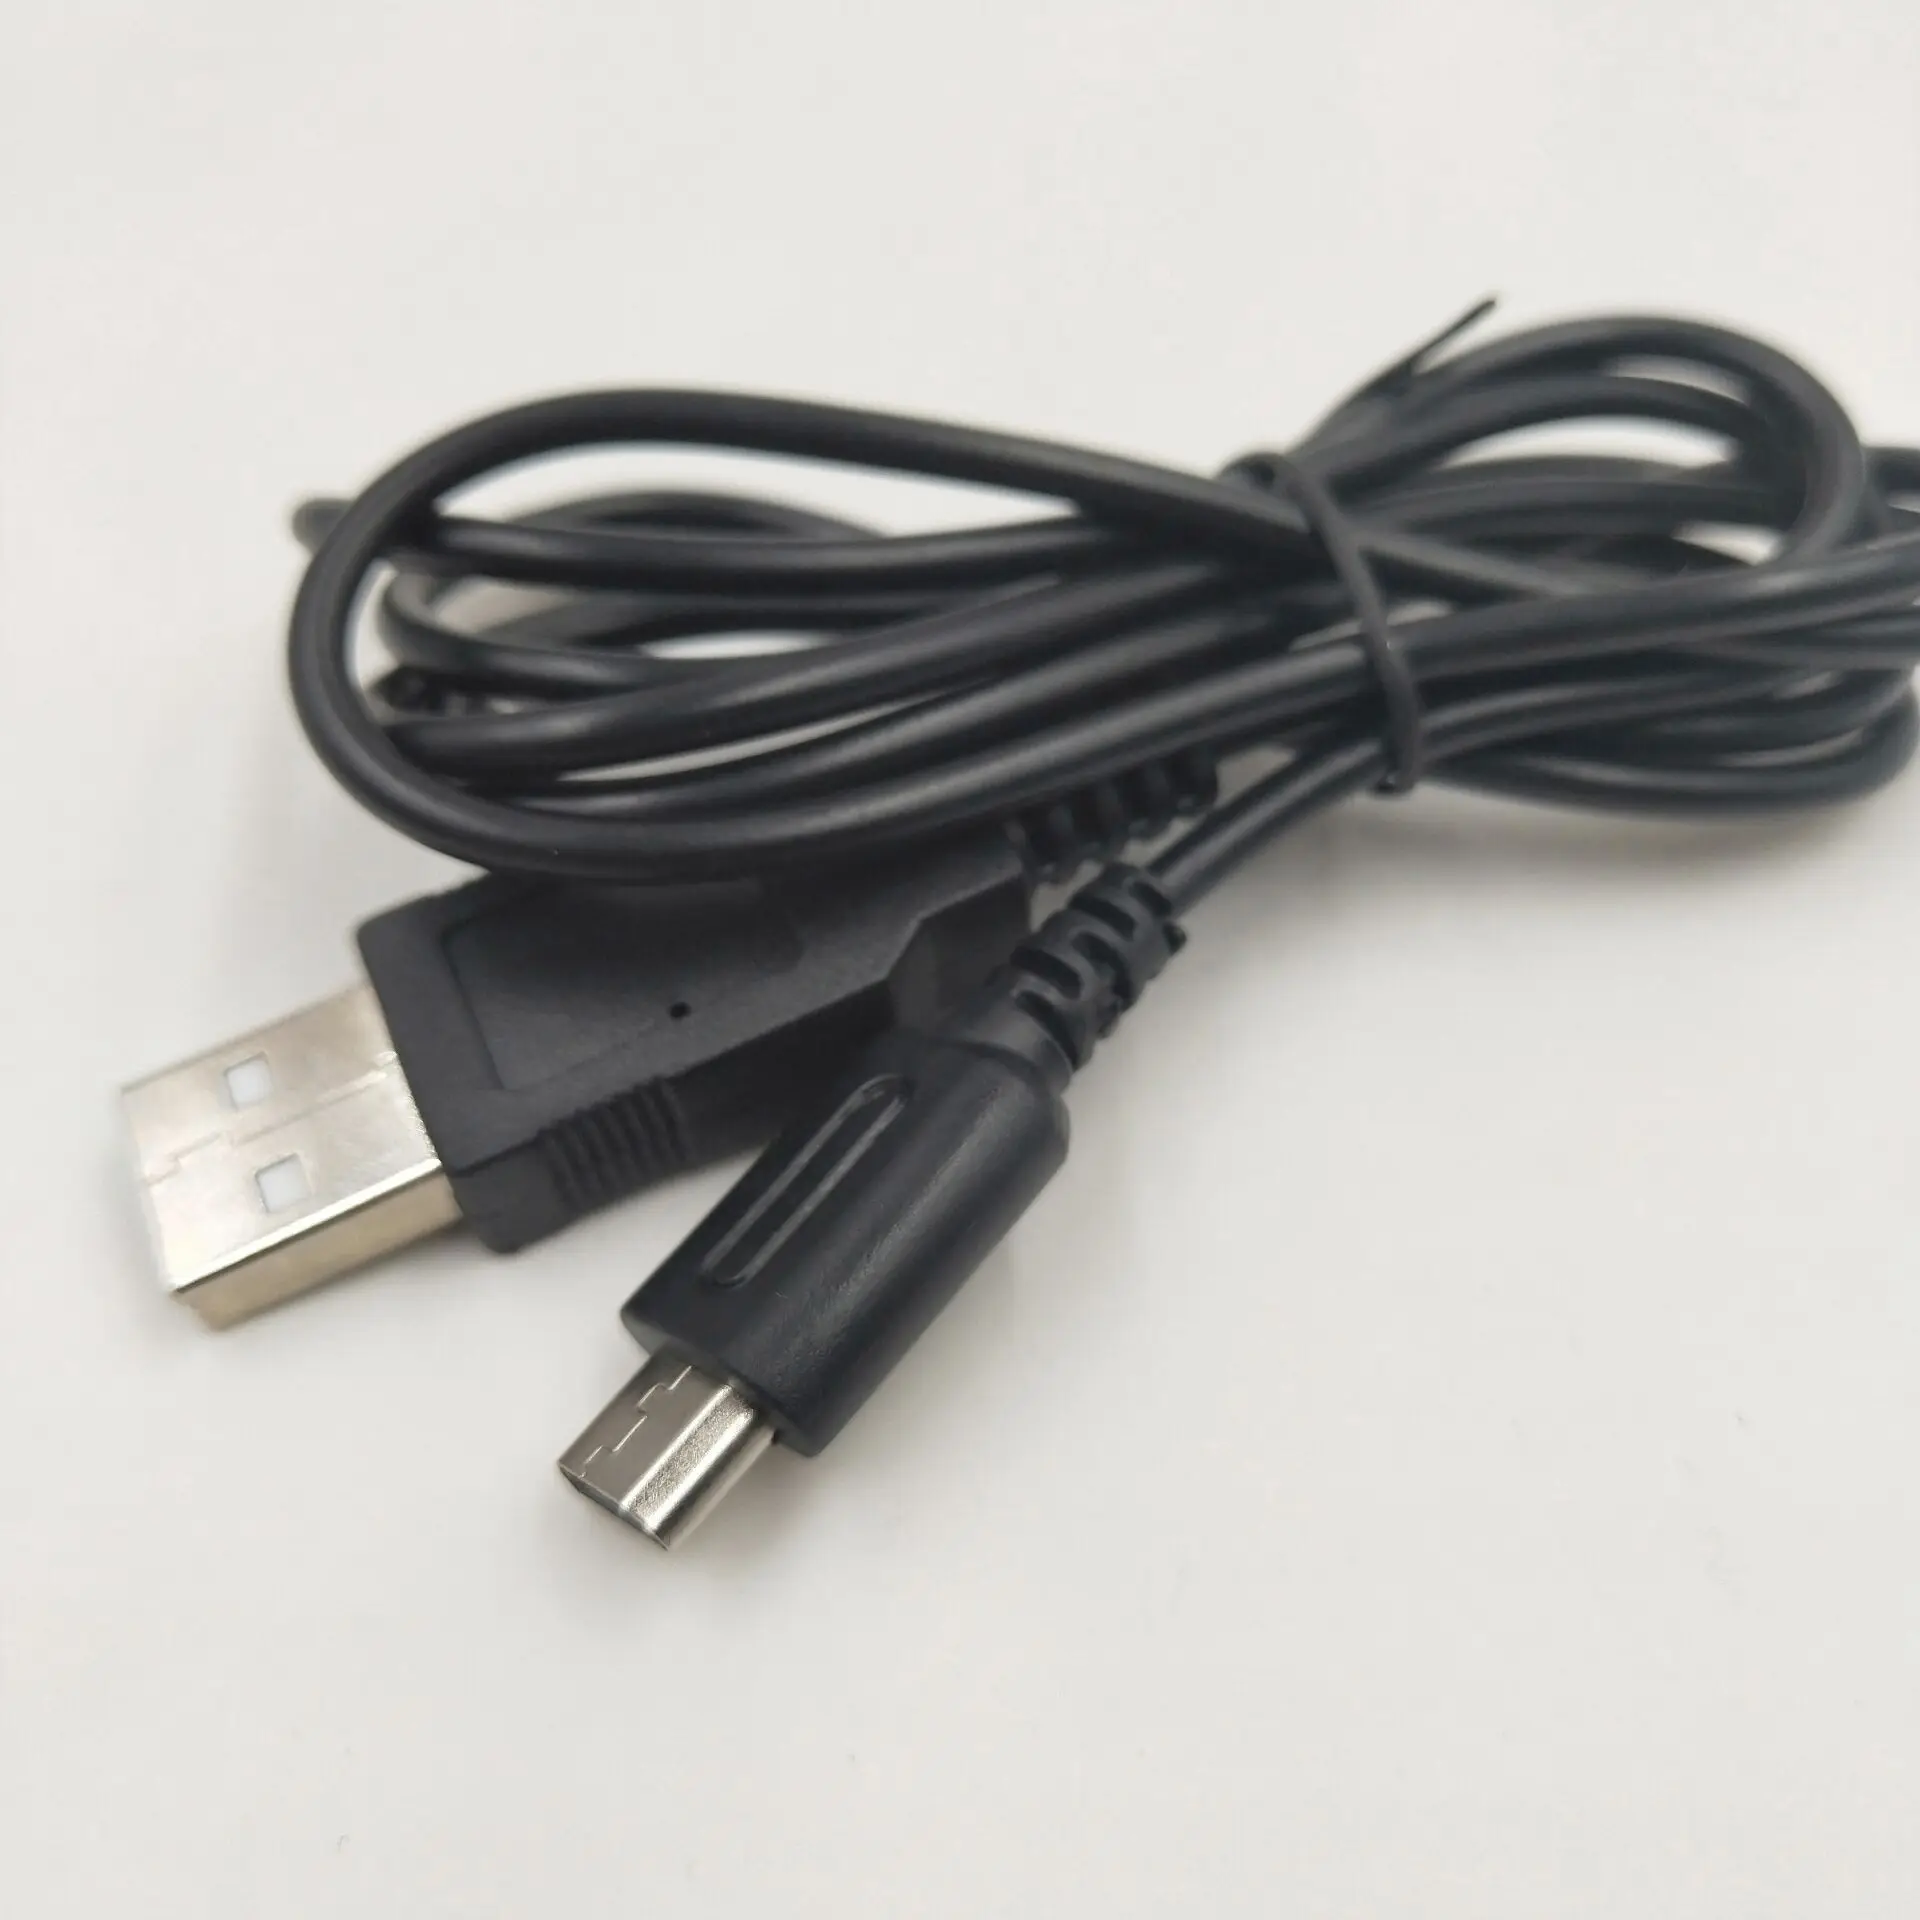 

500pcs lots USB Data Power Charger/Charging Cable Lead Wire Adapter For Nintendo DS Lite NDSL DSL